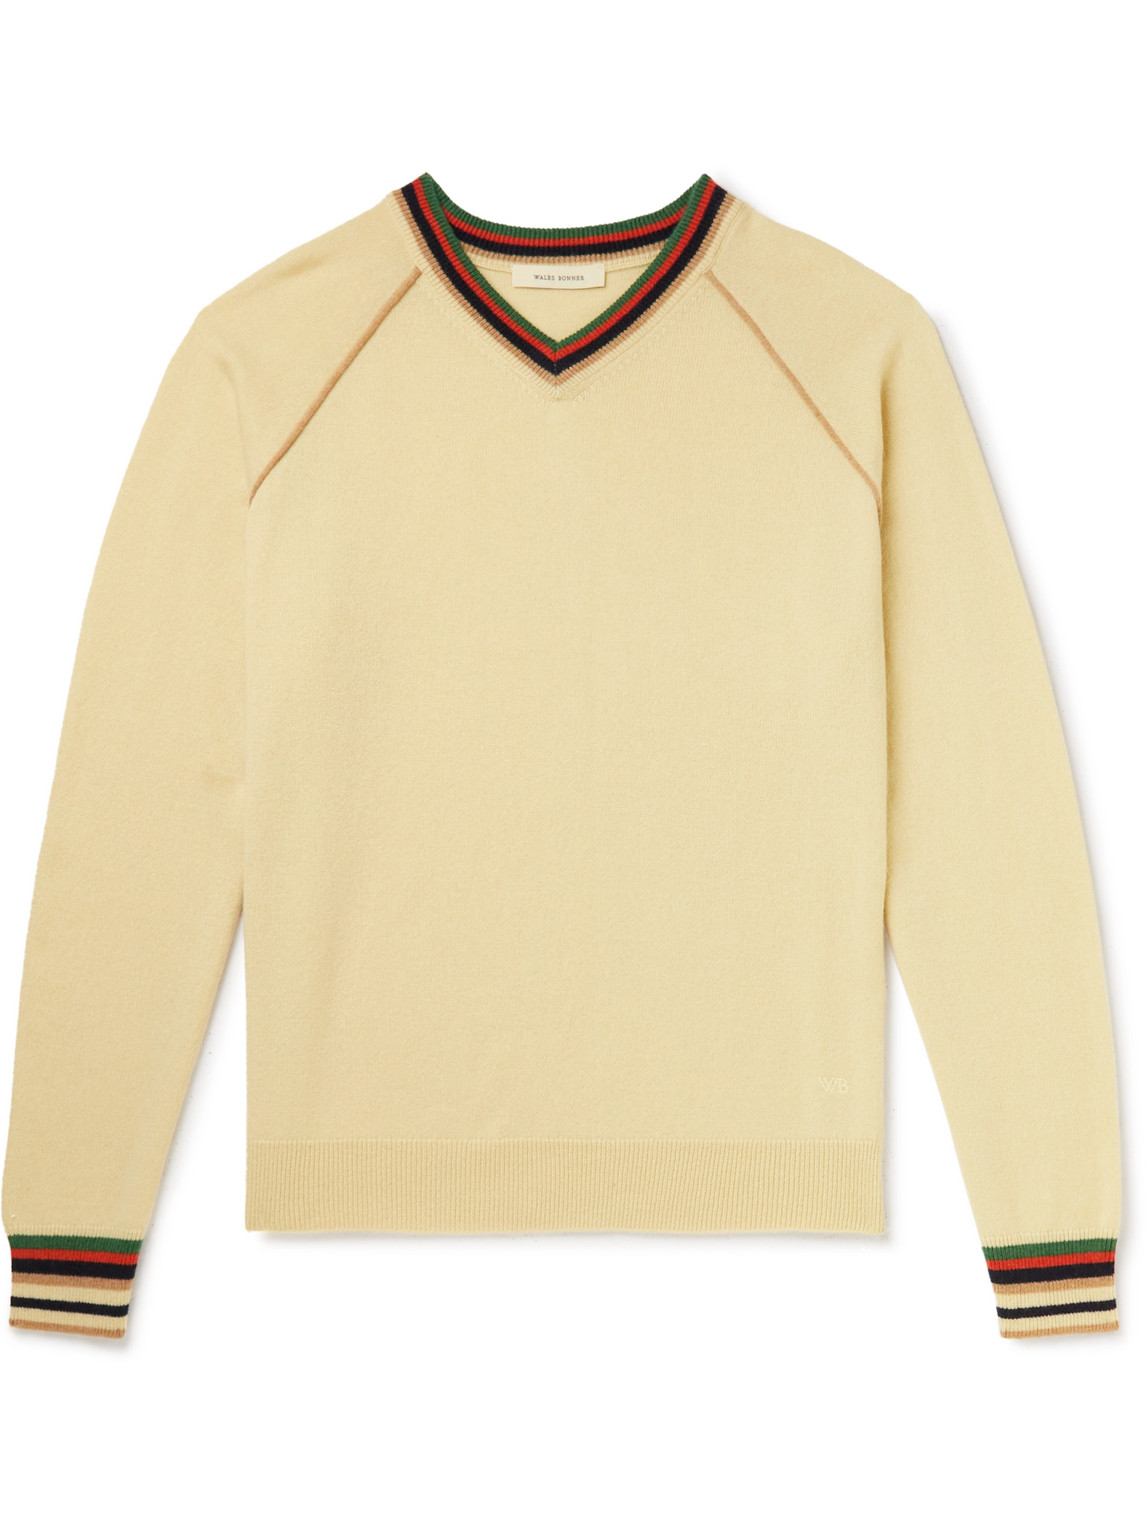 Wales Bonner Striped Cashmere Sweater In Yellow